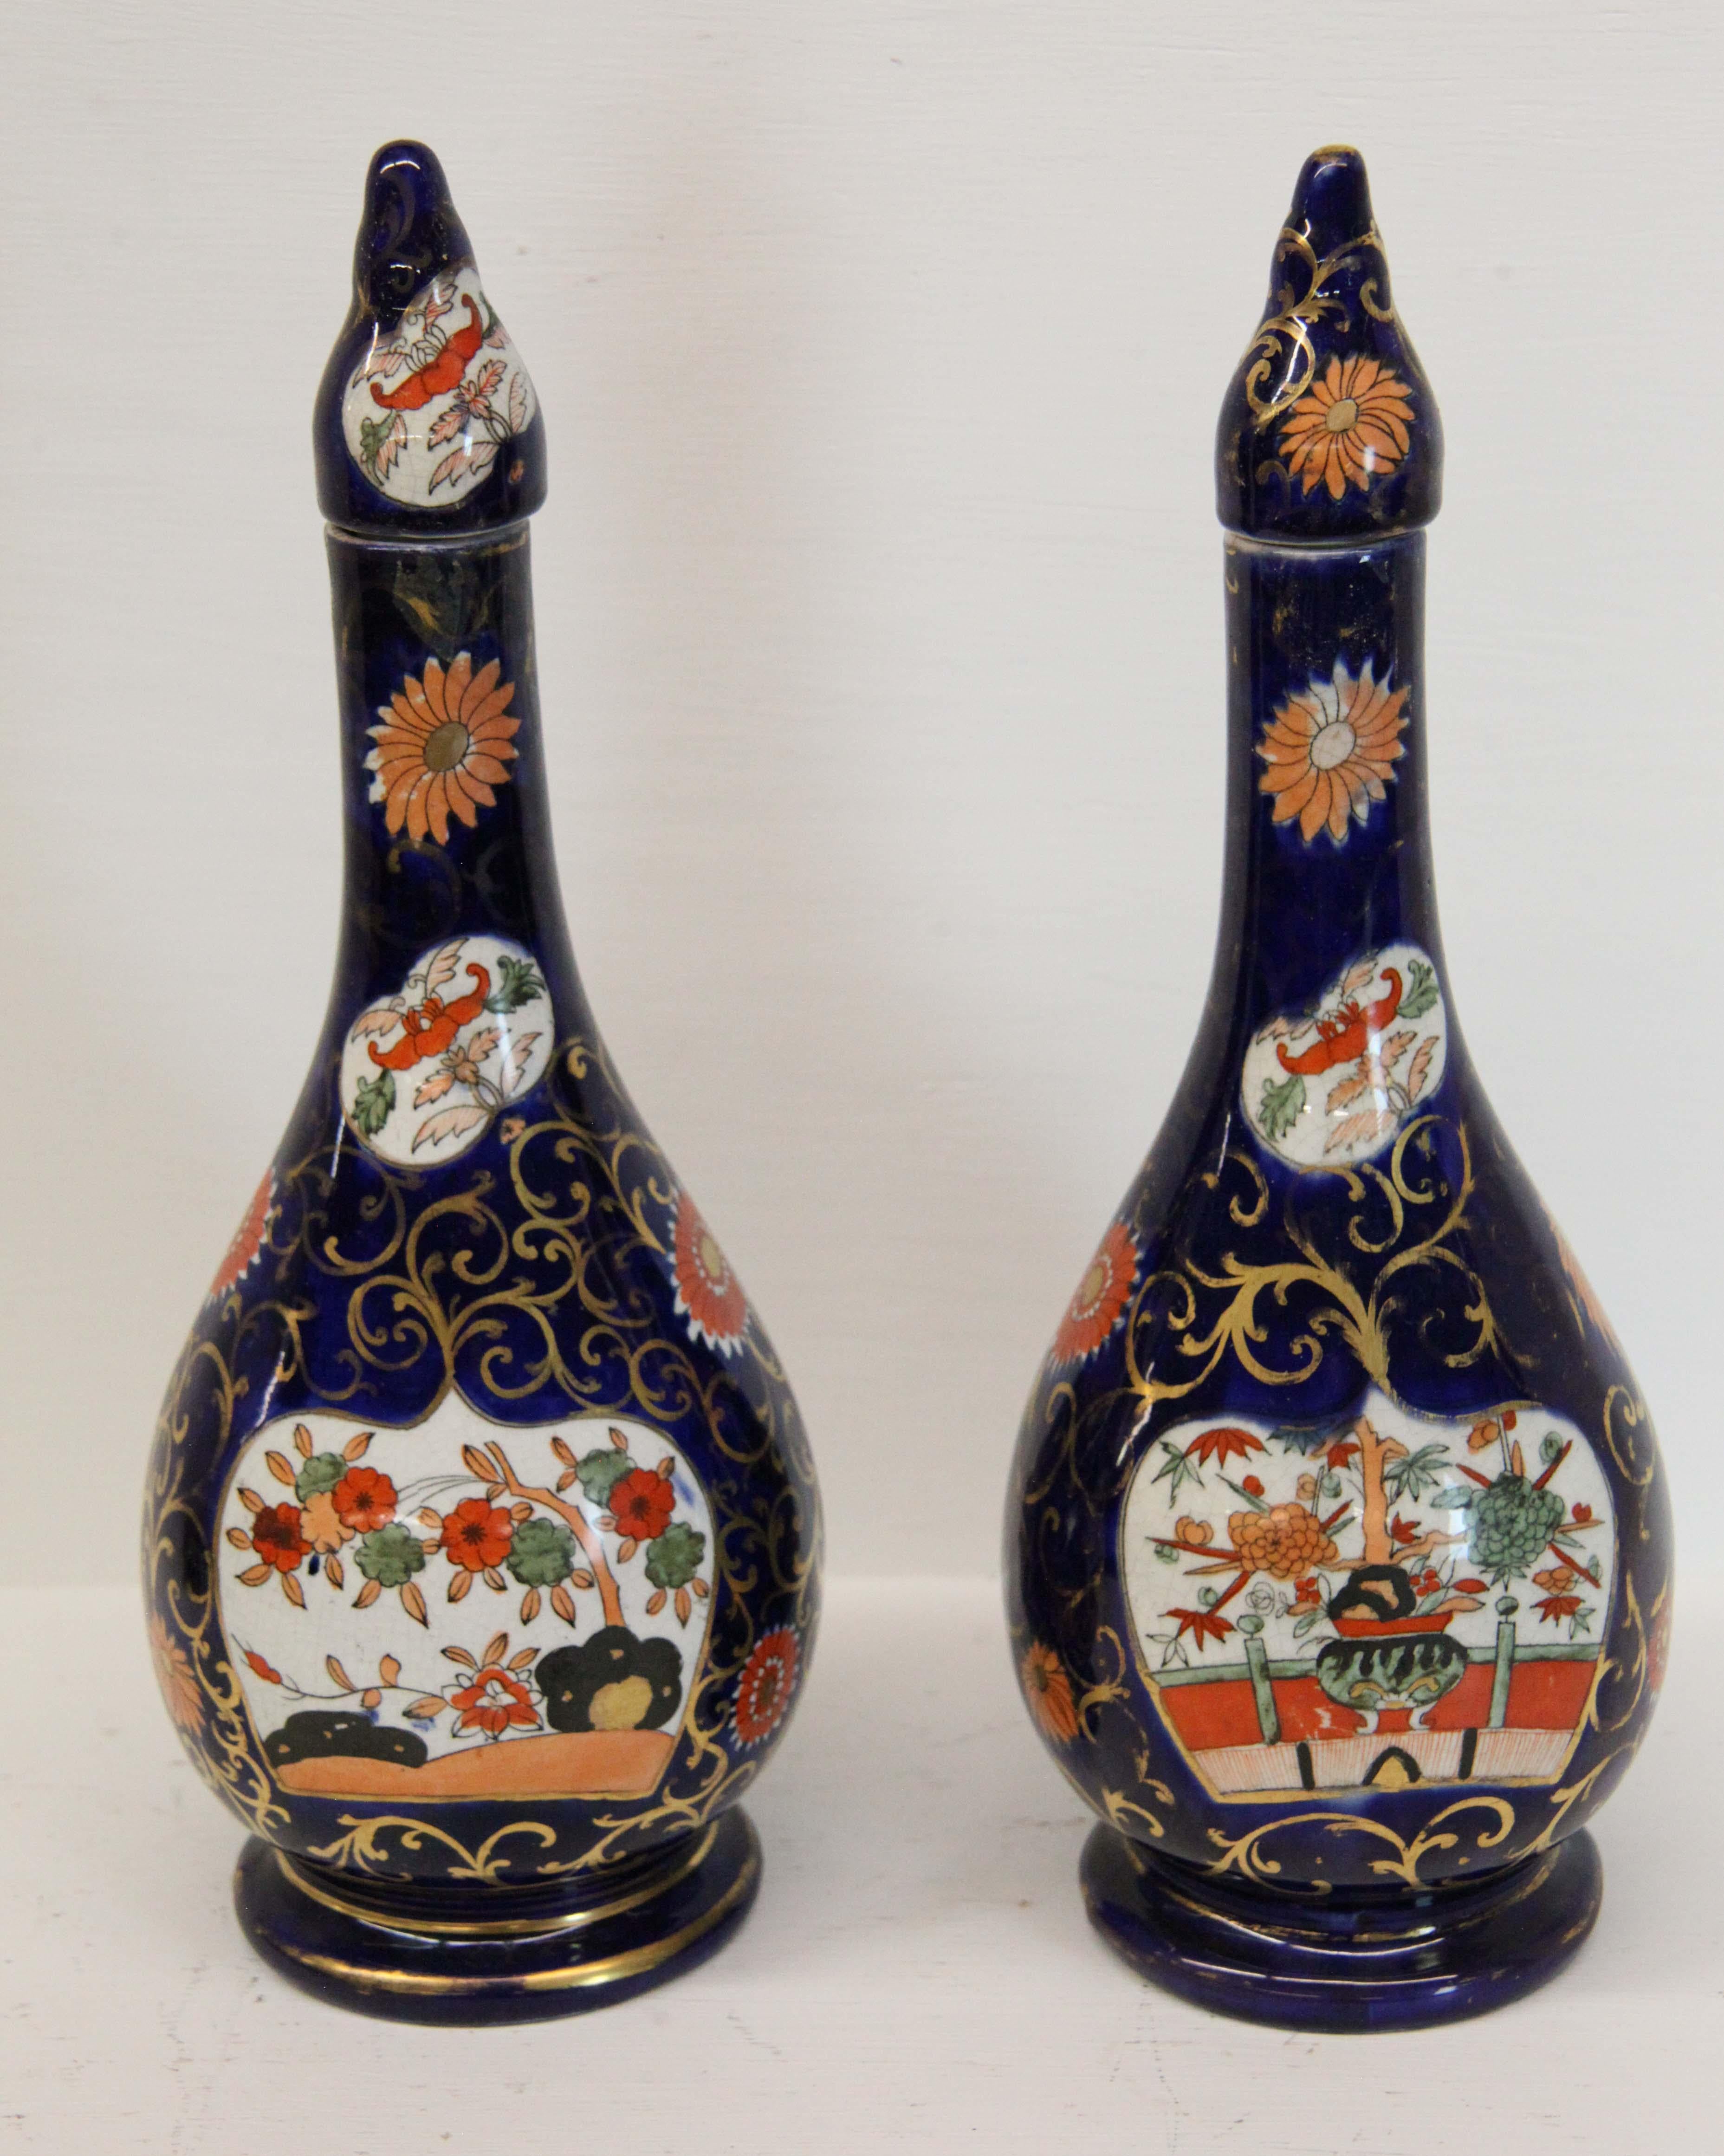 Pair of English ironstone vases with lids, unusual long neck form, the lower portion with floral and foliate filled panels, the cobalt background accented with gilt arabesques.